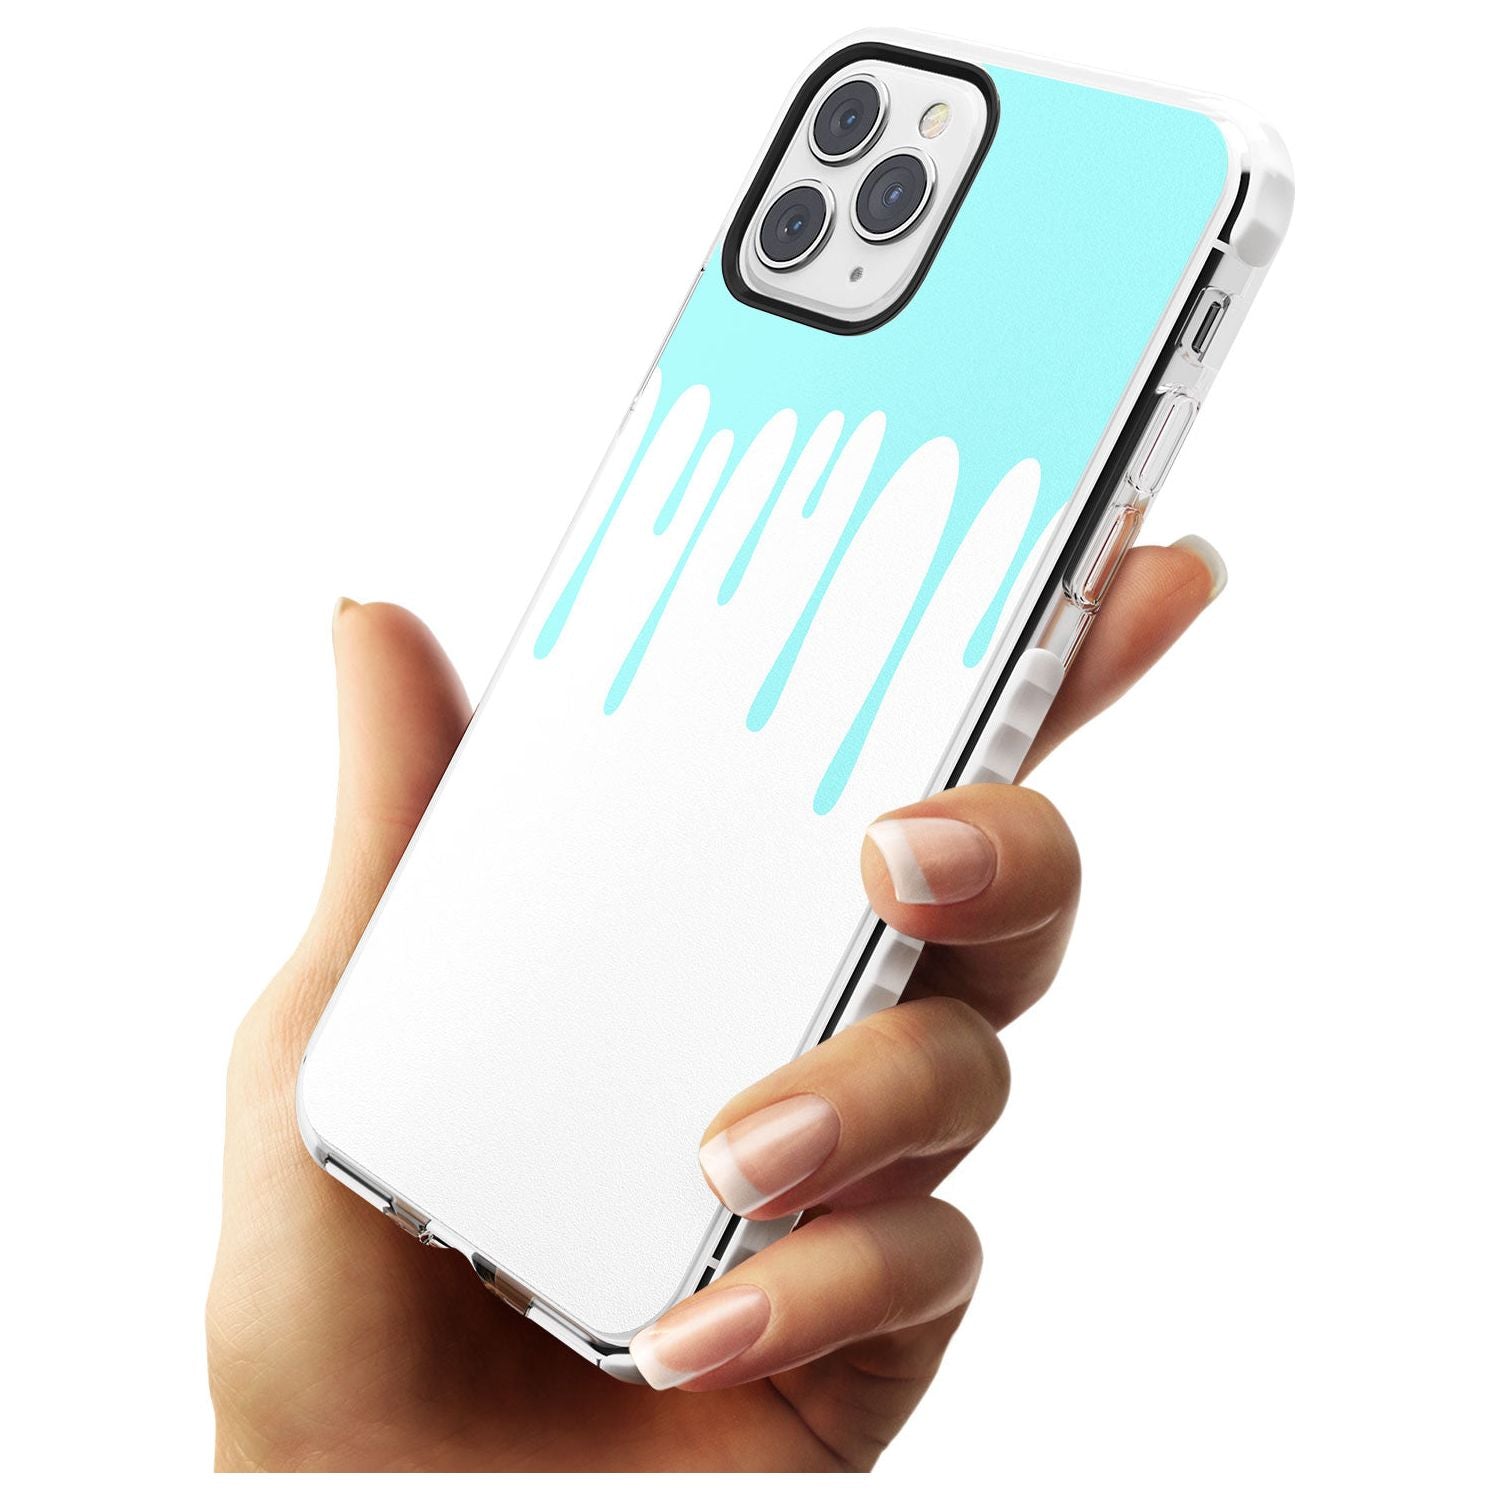 Melted Effect: Teal & White iPhone Case Impact Phone Case Warehouse 11 Pro Max